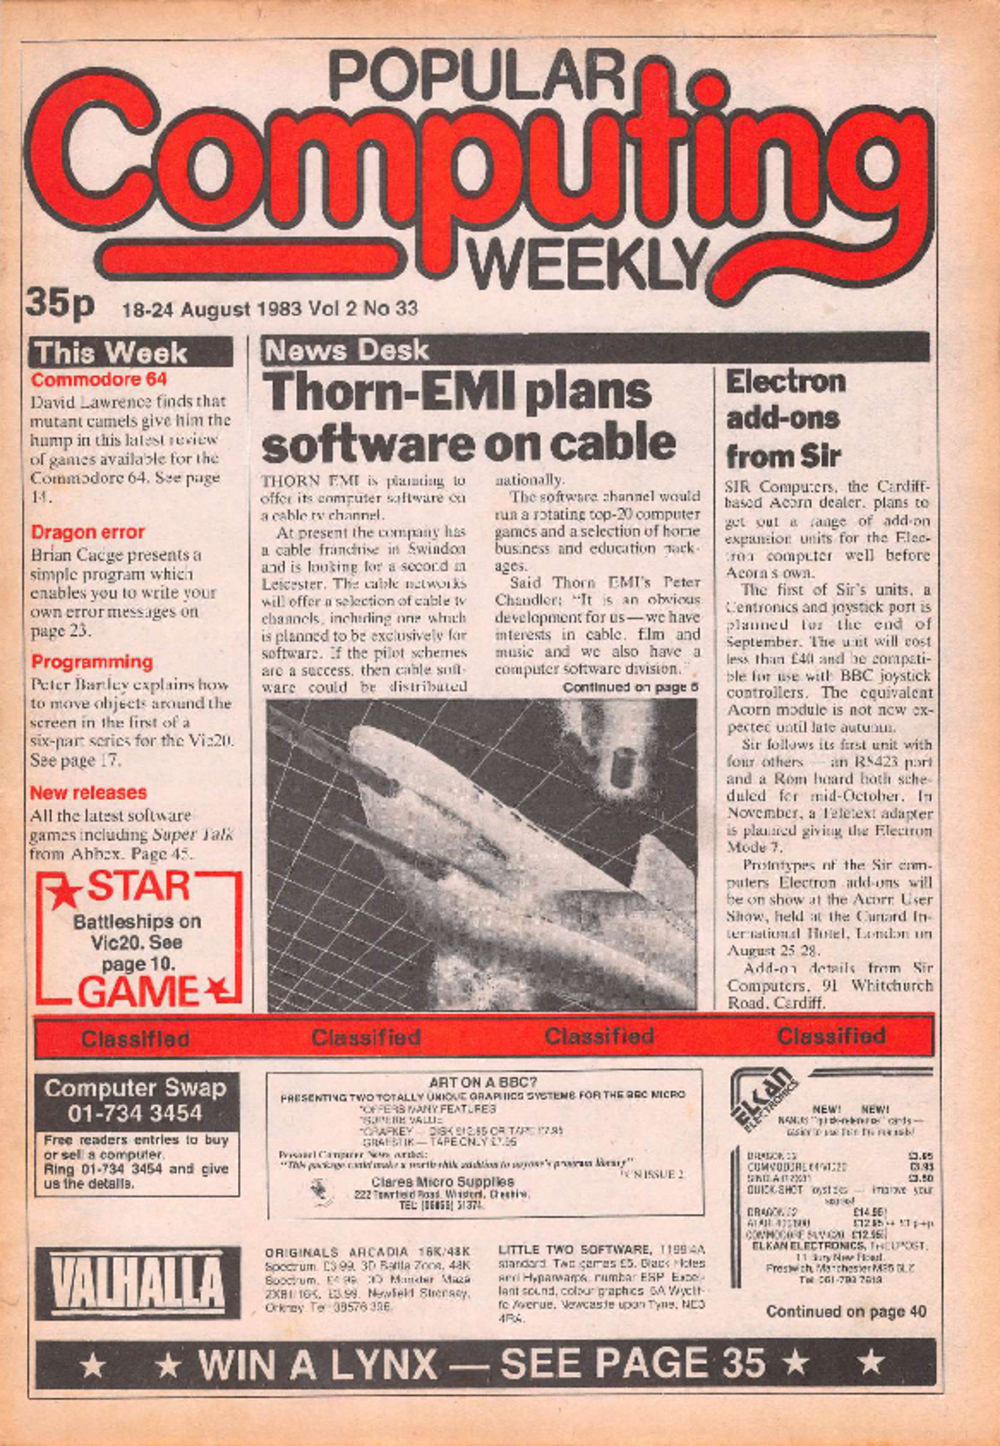 Article: Popular Computing Weekly Vol 2 No 33 - 18-24 August 1983